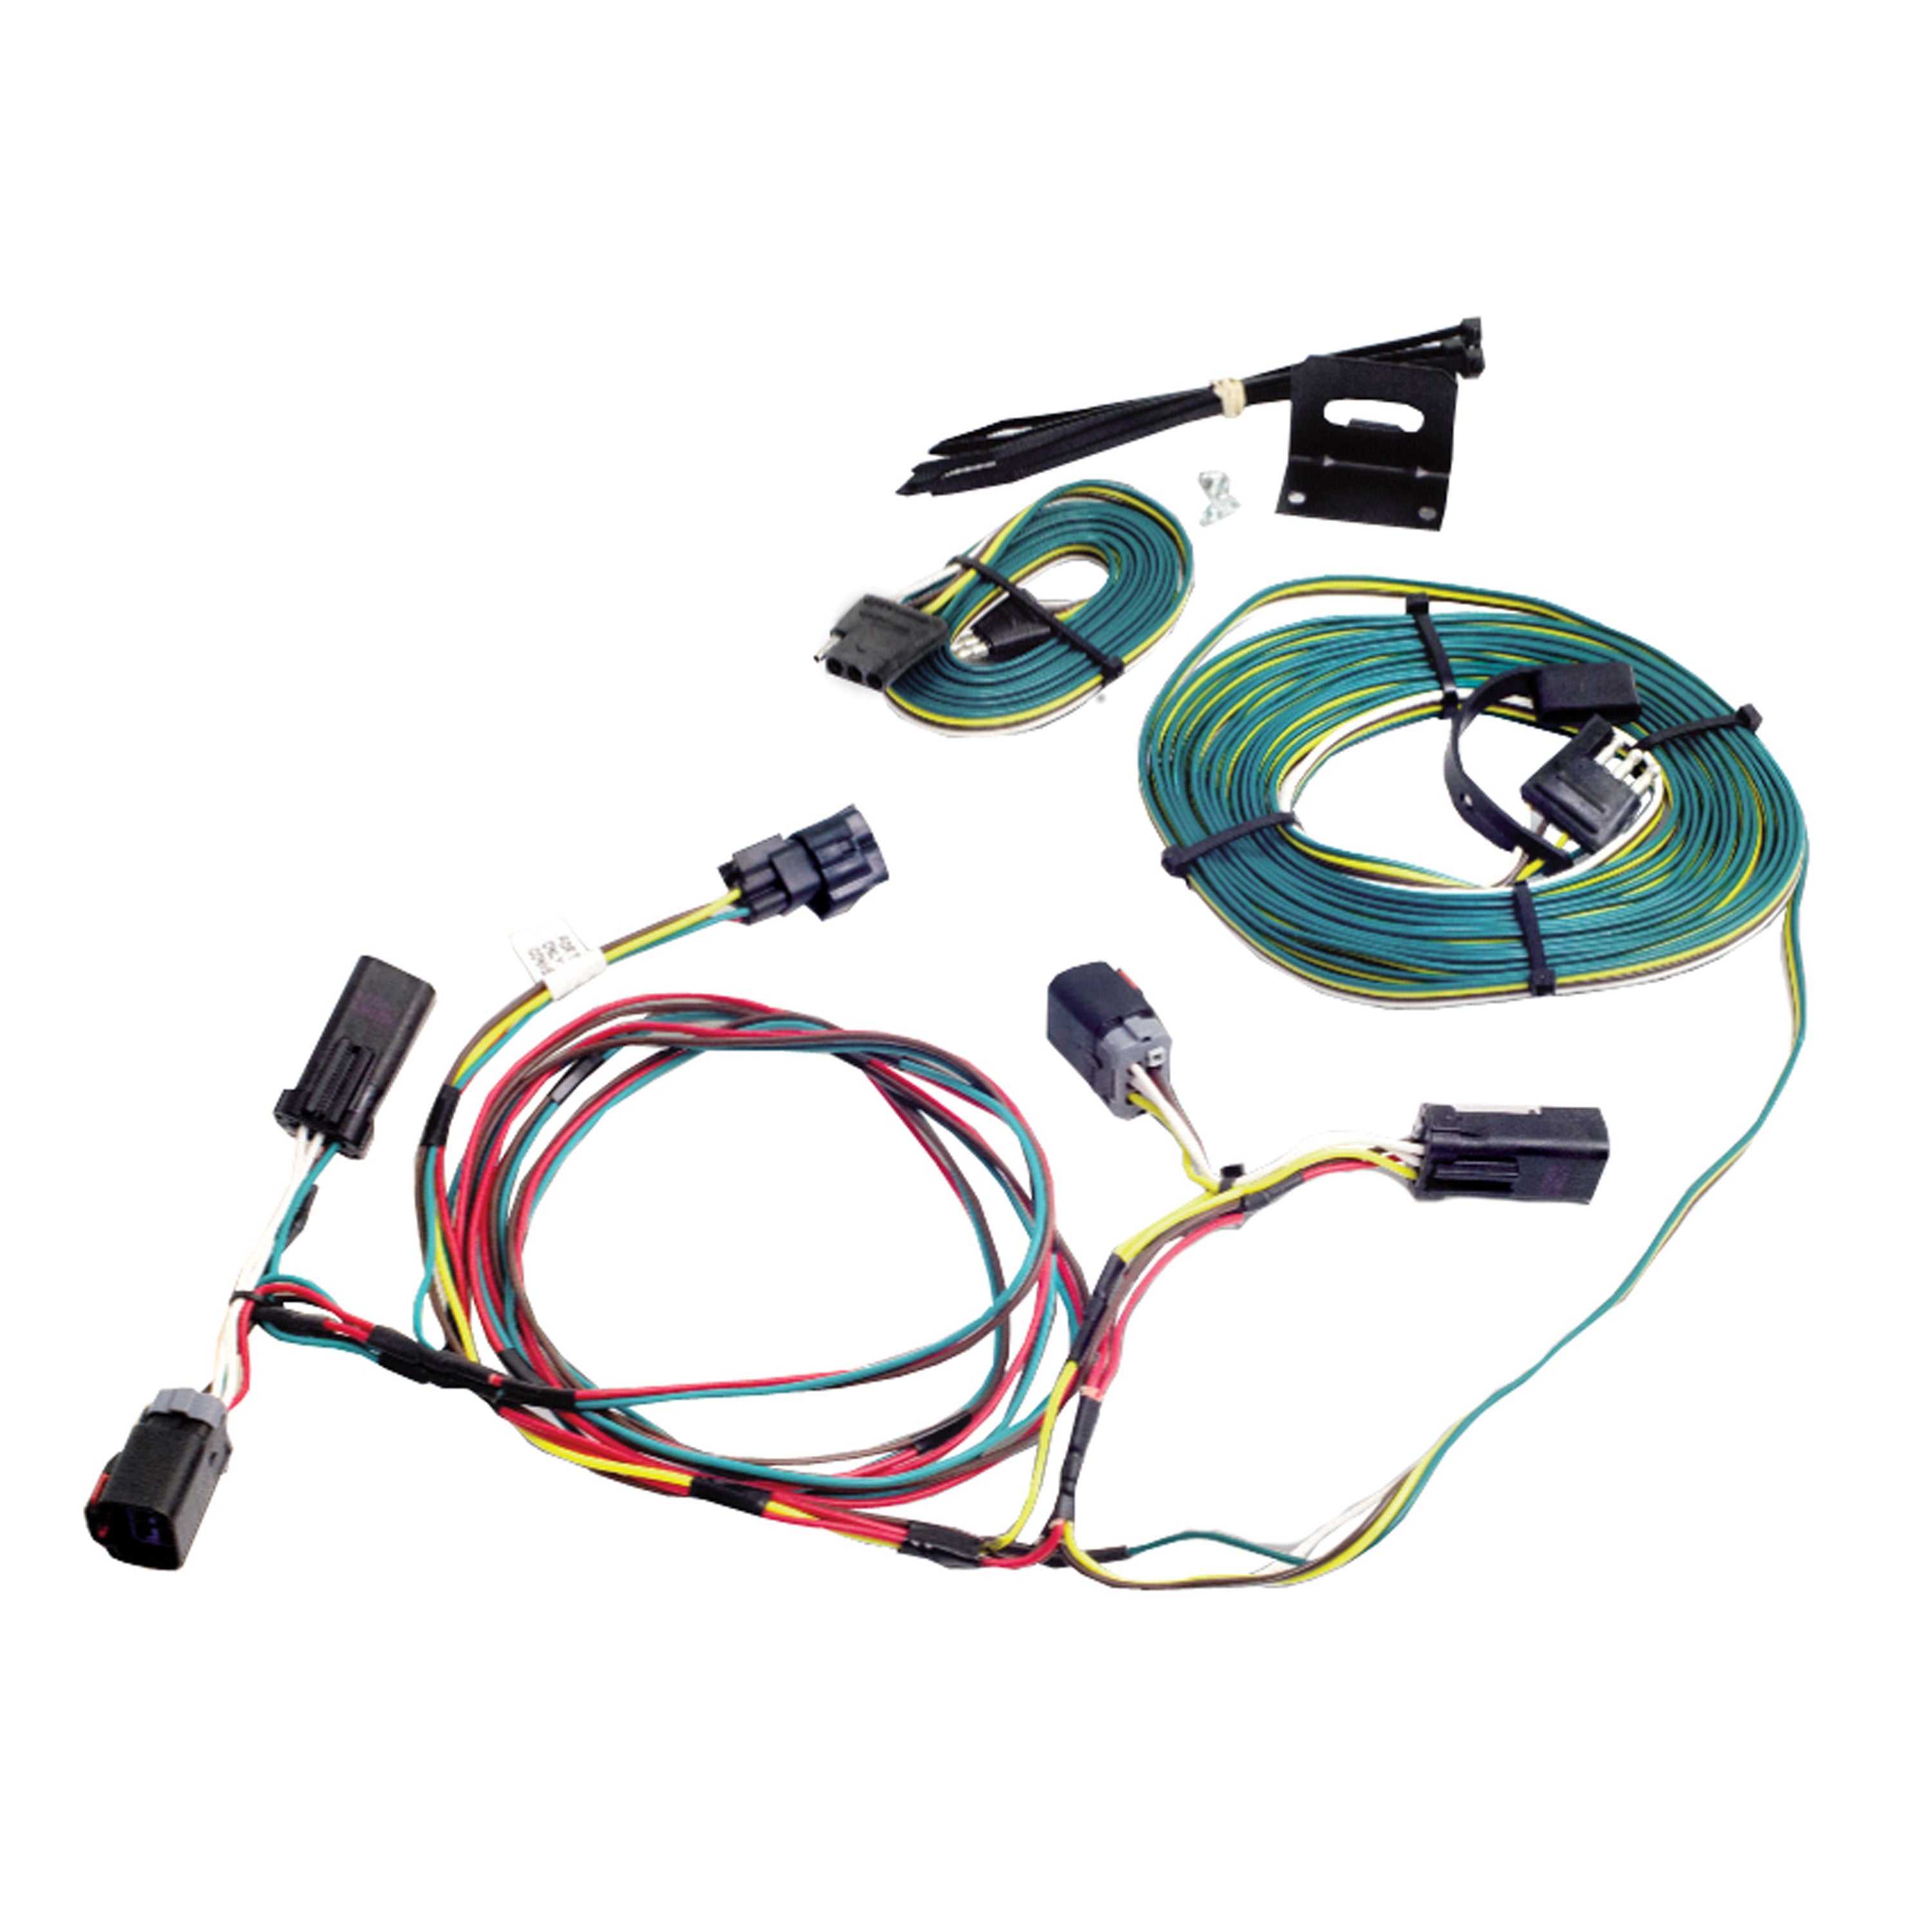 Demco 9523074 Towed Connector Vehicle Wiring Kit - For Chevy Colorado / '04-'12 GMC Canyon '04-'12